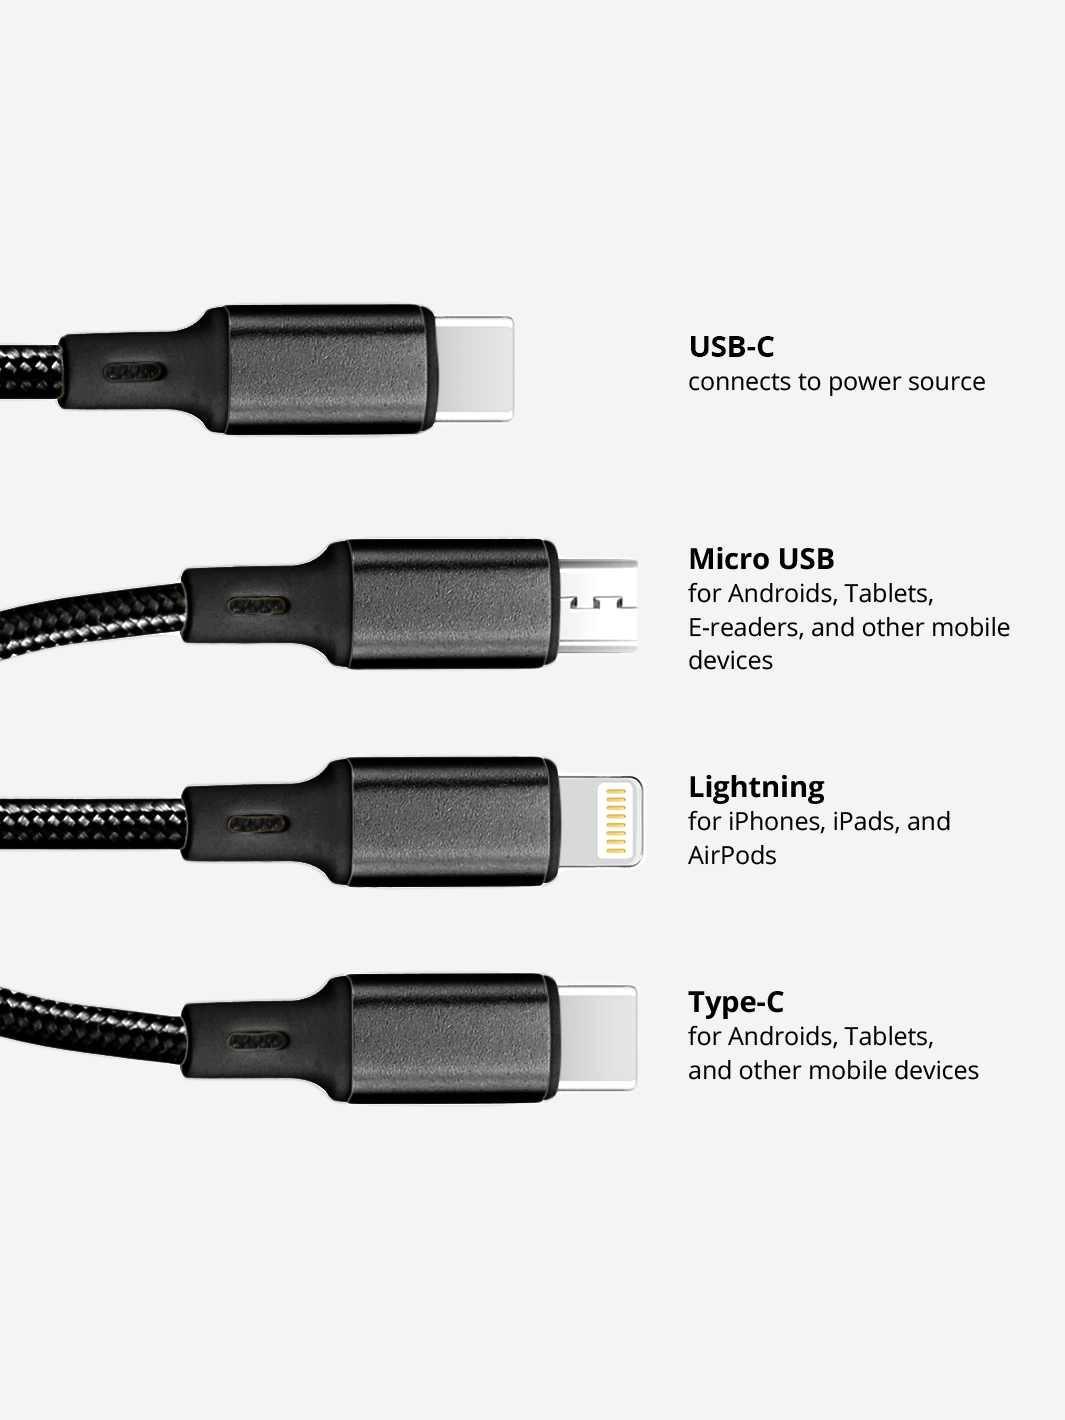 USB-C Black 3-in-1 Charging Cable